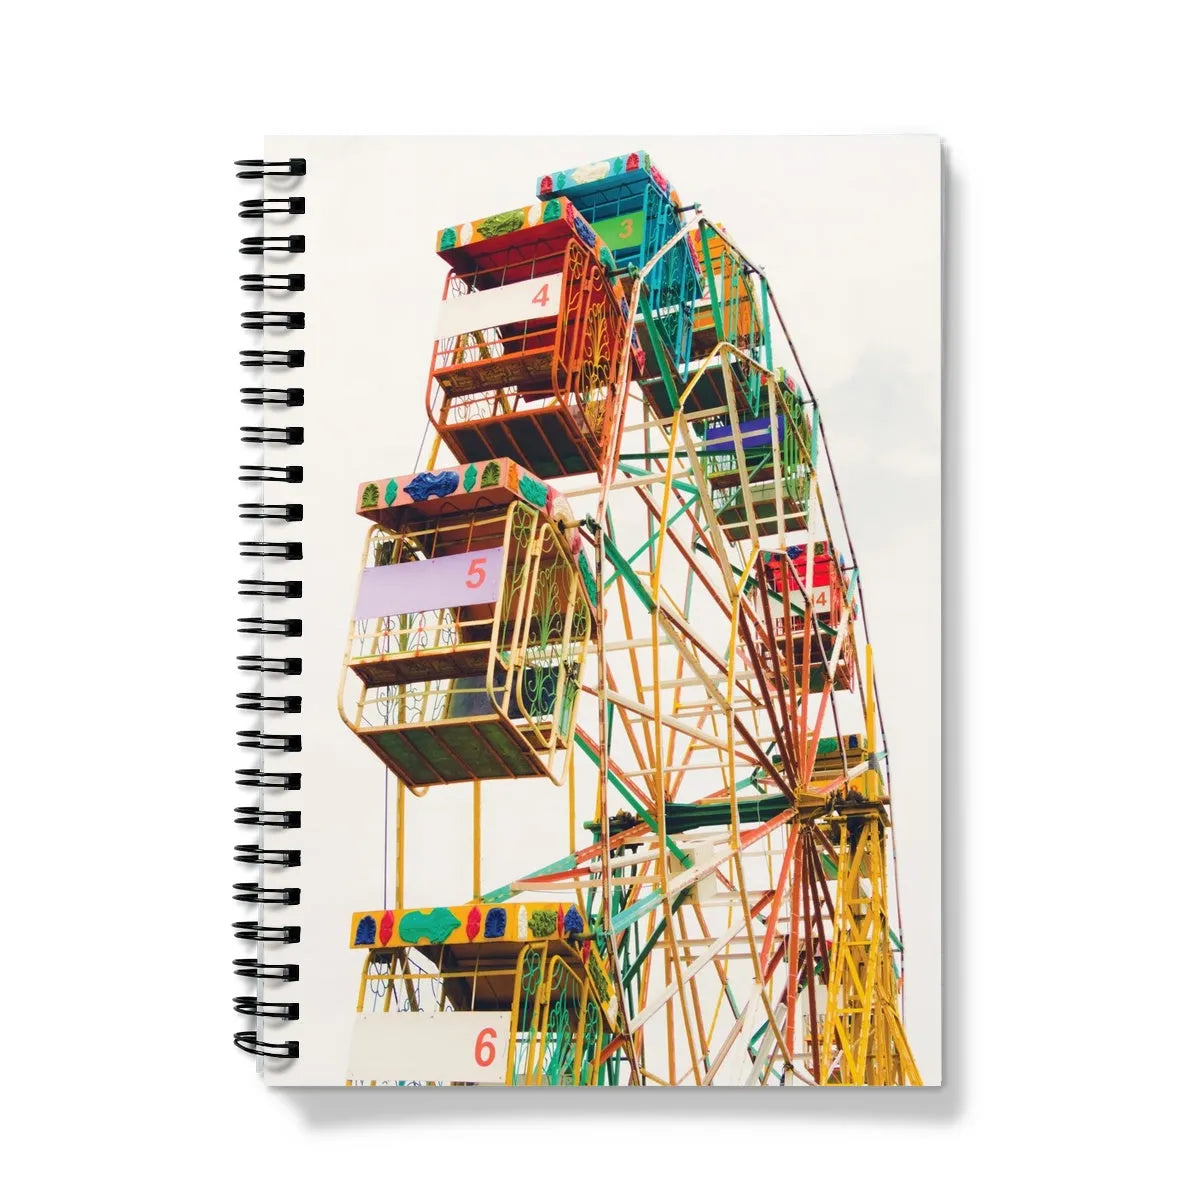 Wheel Of Fortune Notebook - A5 - Graph Paper - Notebooks & Notepads - Aesthetic Art